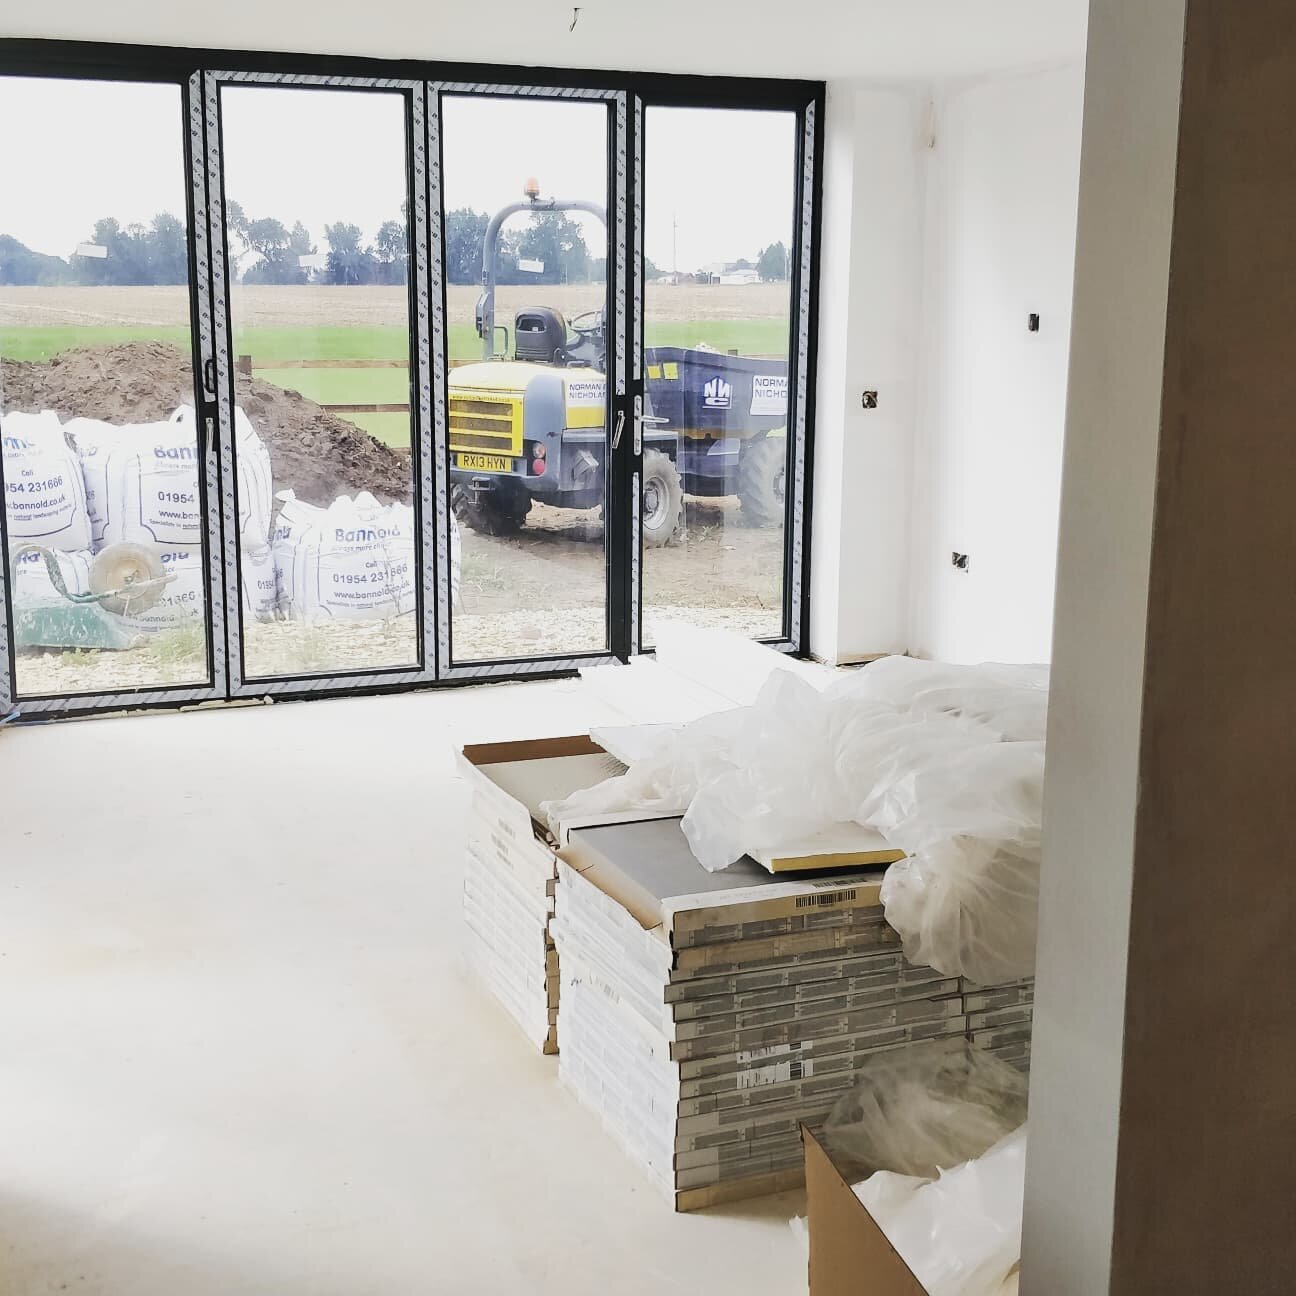 Plenty of action at Greenfields this last week as we rush to prepare for the kitchen installation. Tiling has begun, as well as staircase installation, internal doors and much more. Clients who have registered on www.greenfieldswilburton.co.uk will b